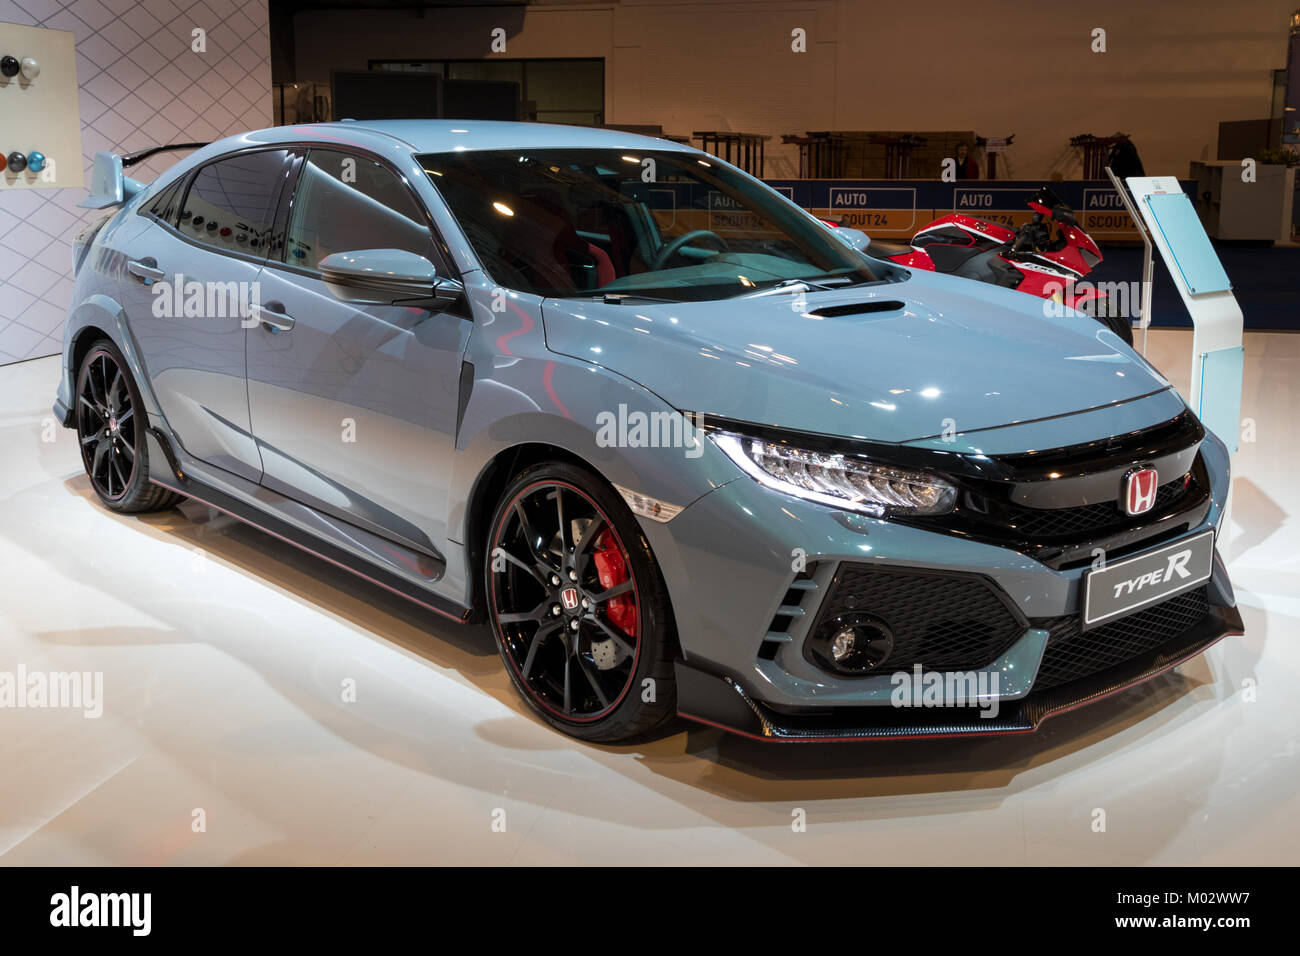 BRUSSELS - JAN 10, 2018: Honda Civic Type R high performance car showcased  at the Brussels Motor Show Stock Photo - Alamy